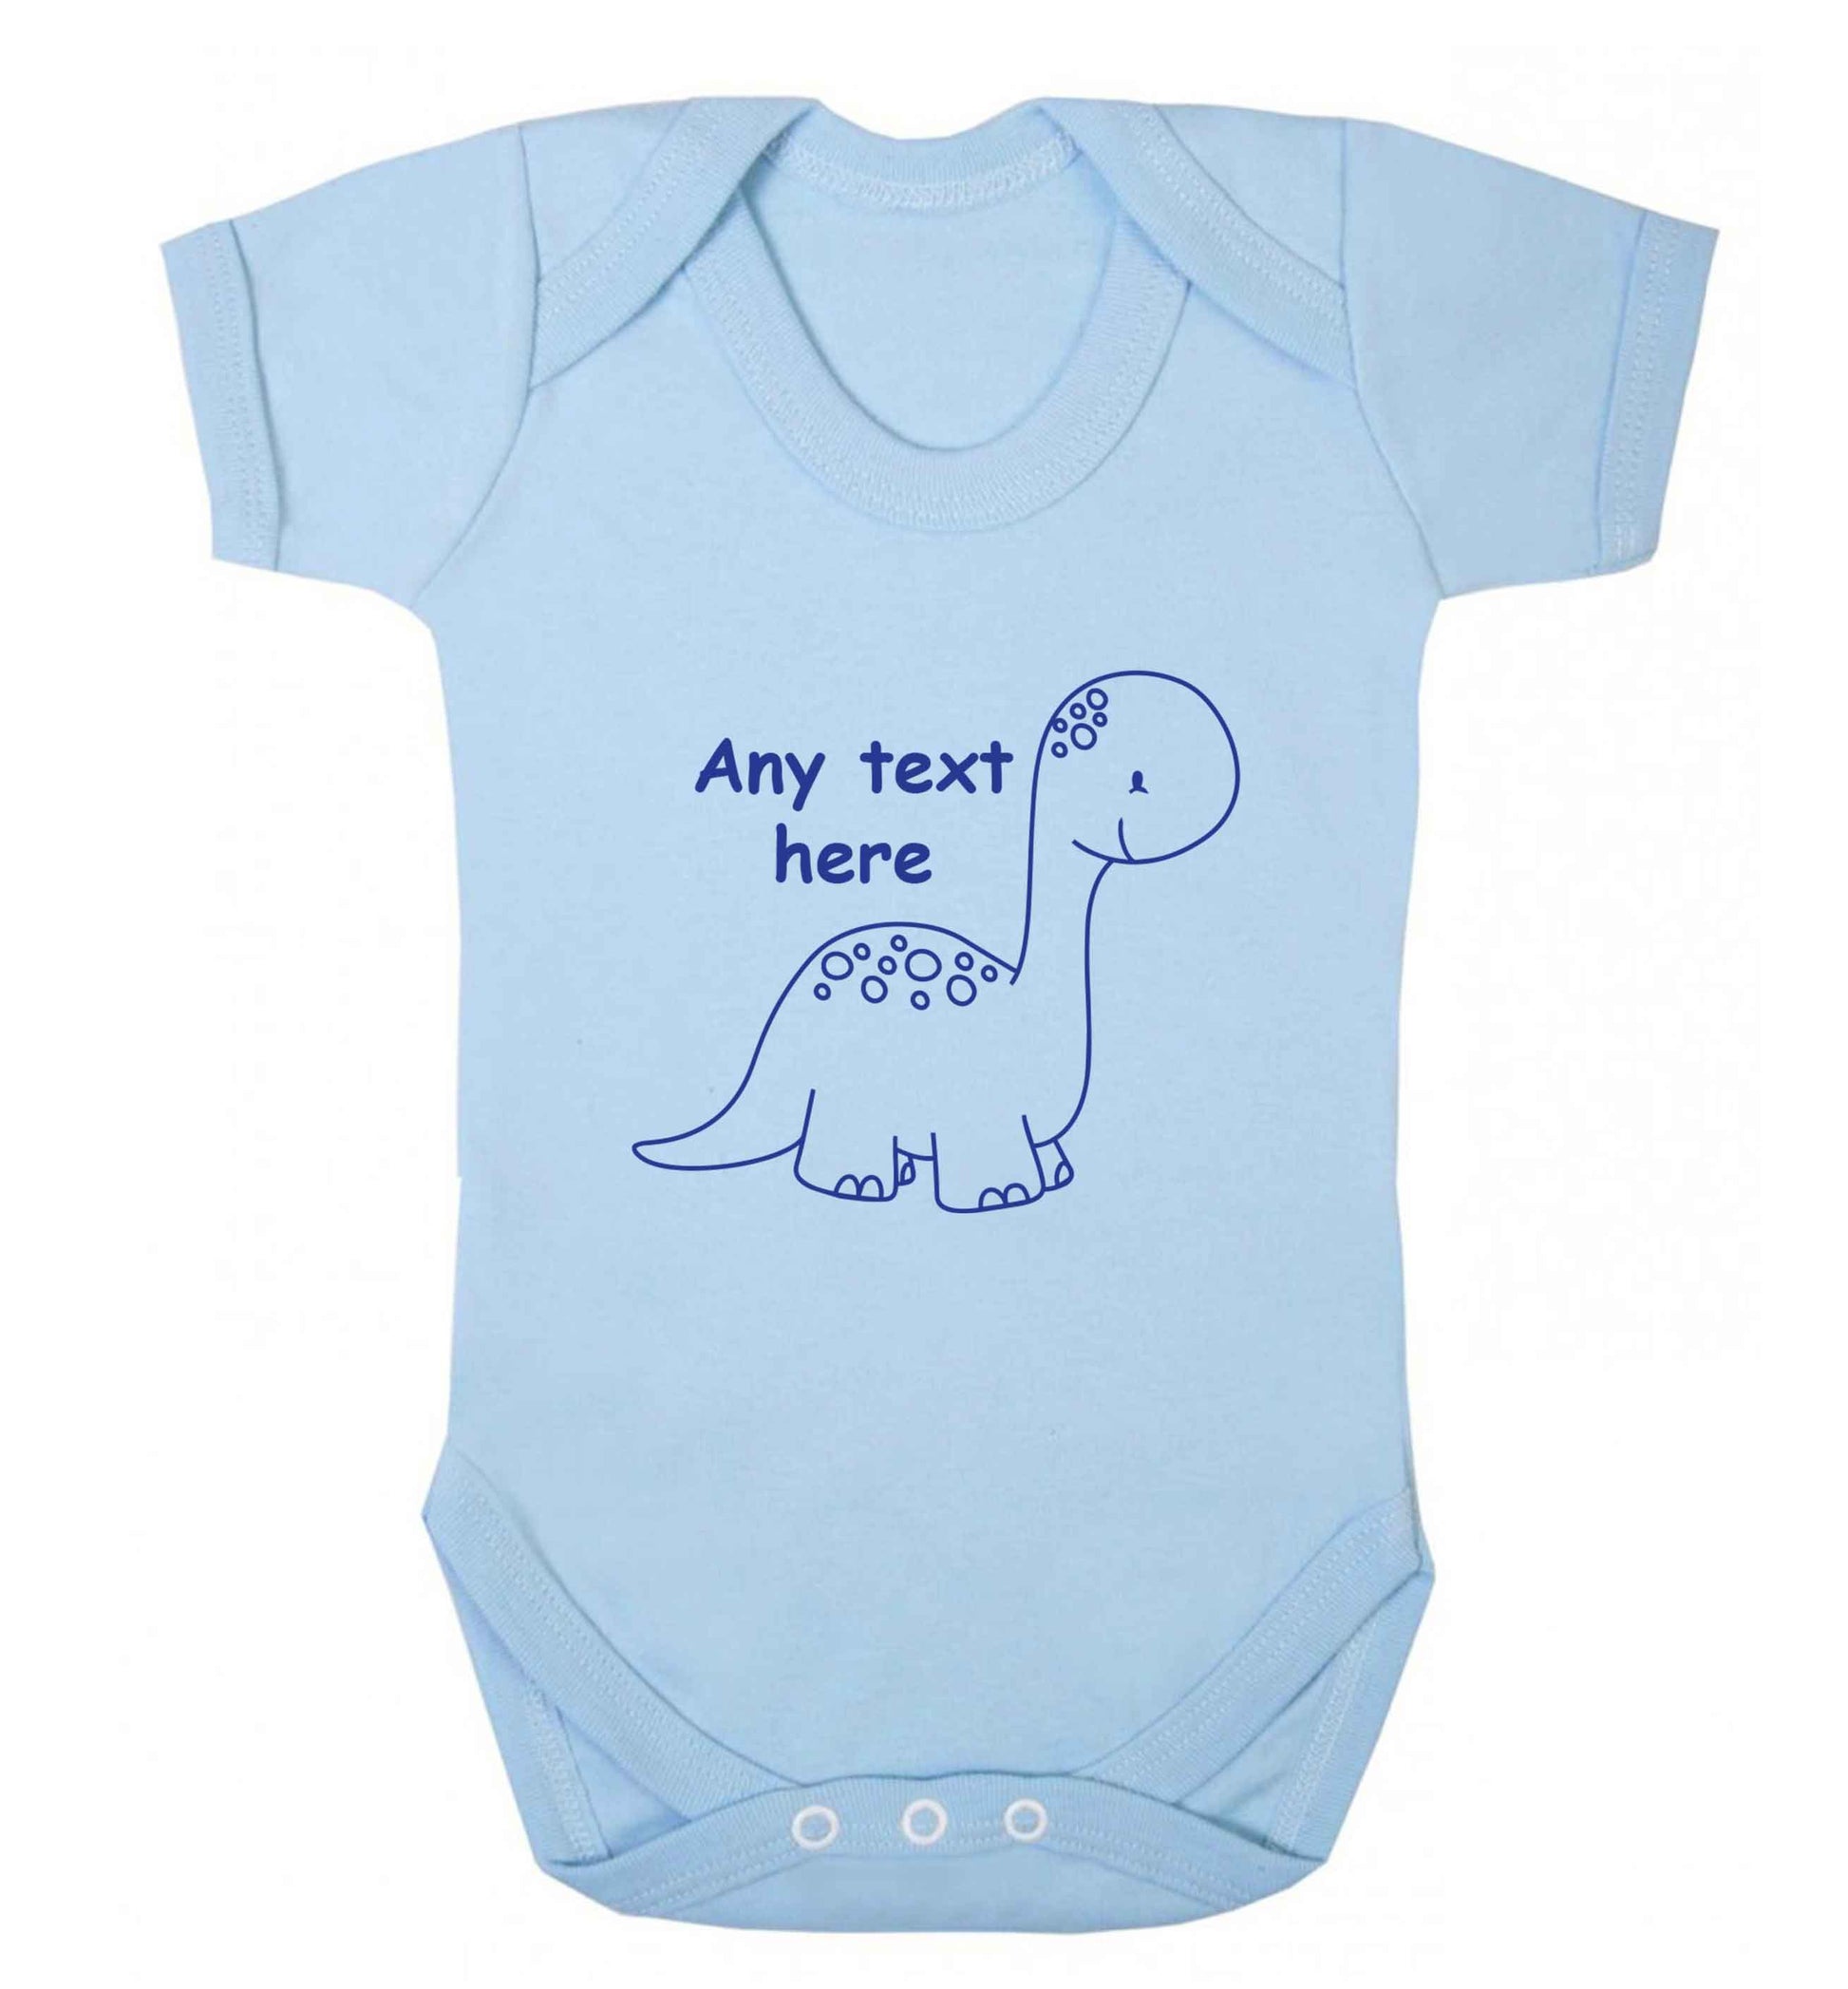 Dinosaur any text baby vest pale blue 18-24 months